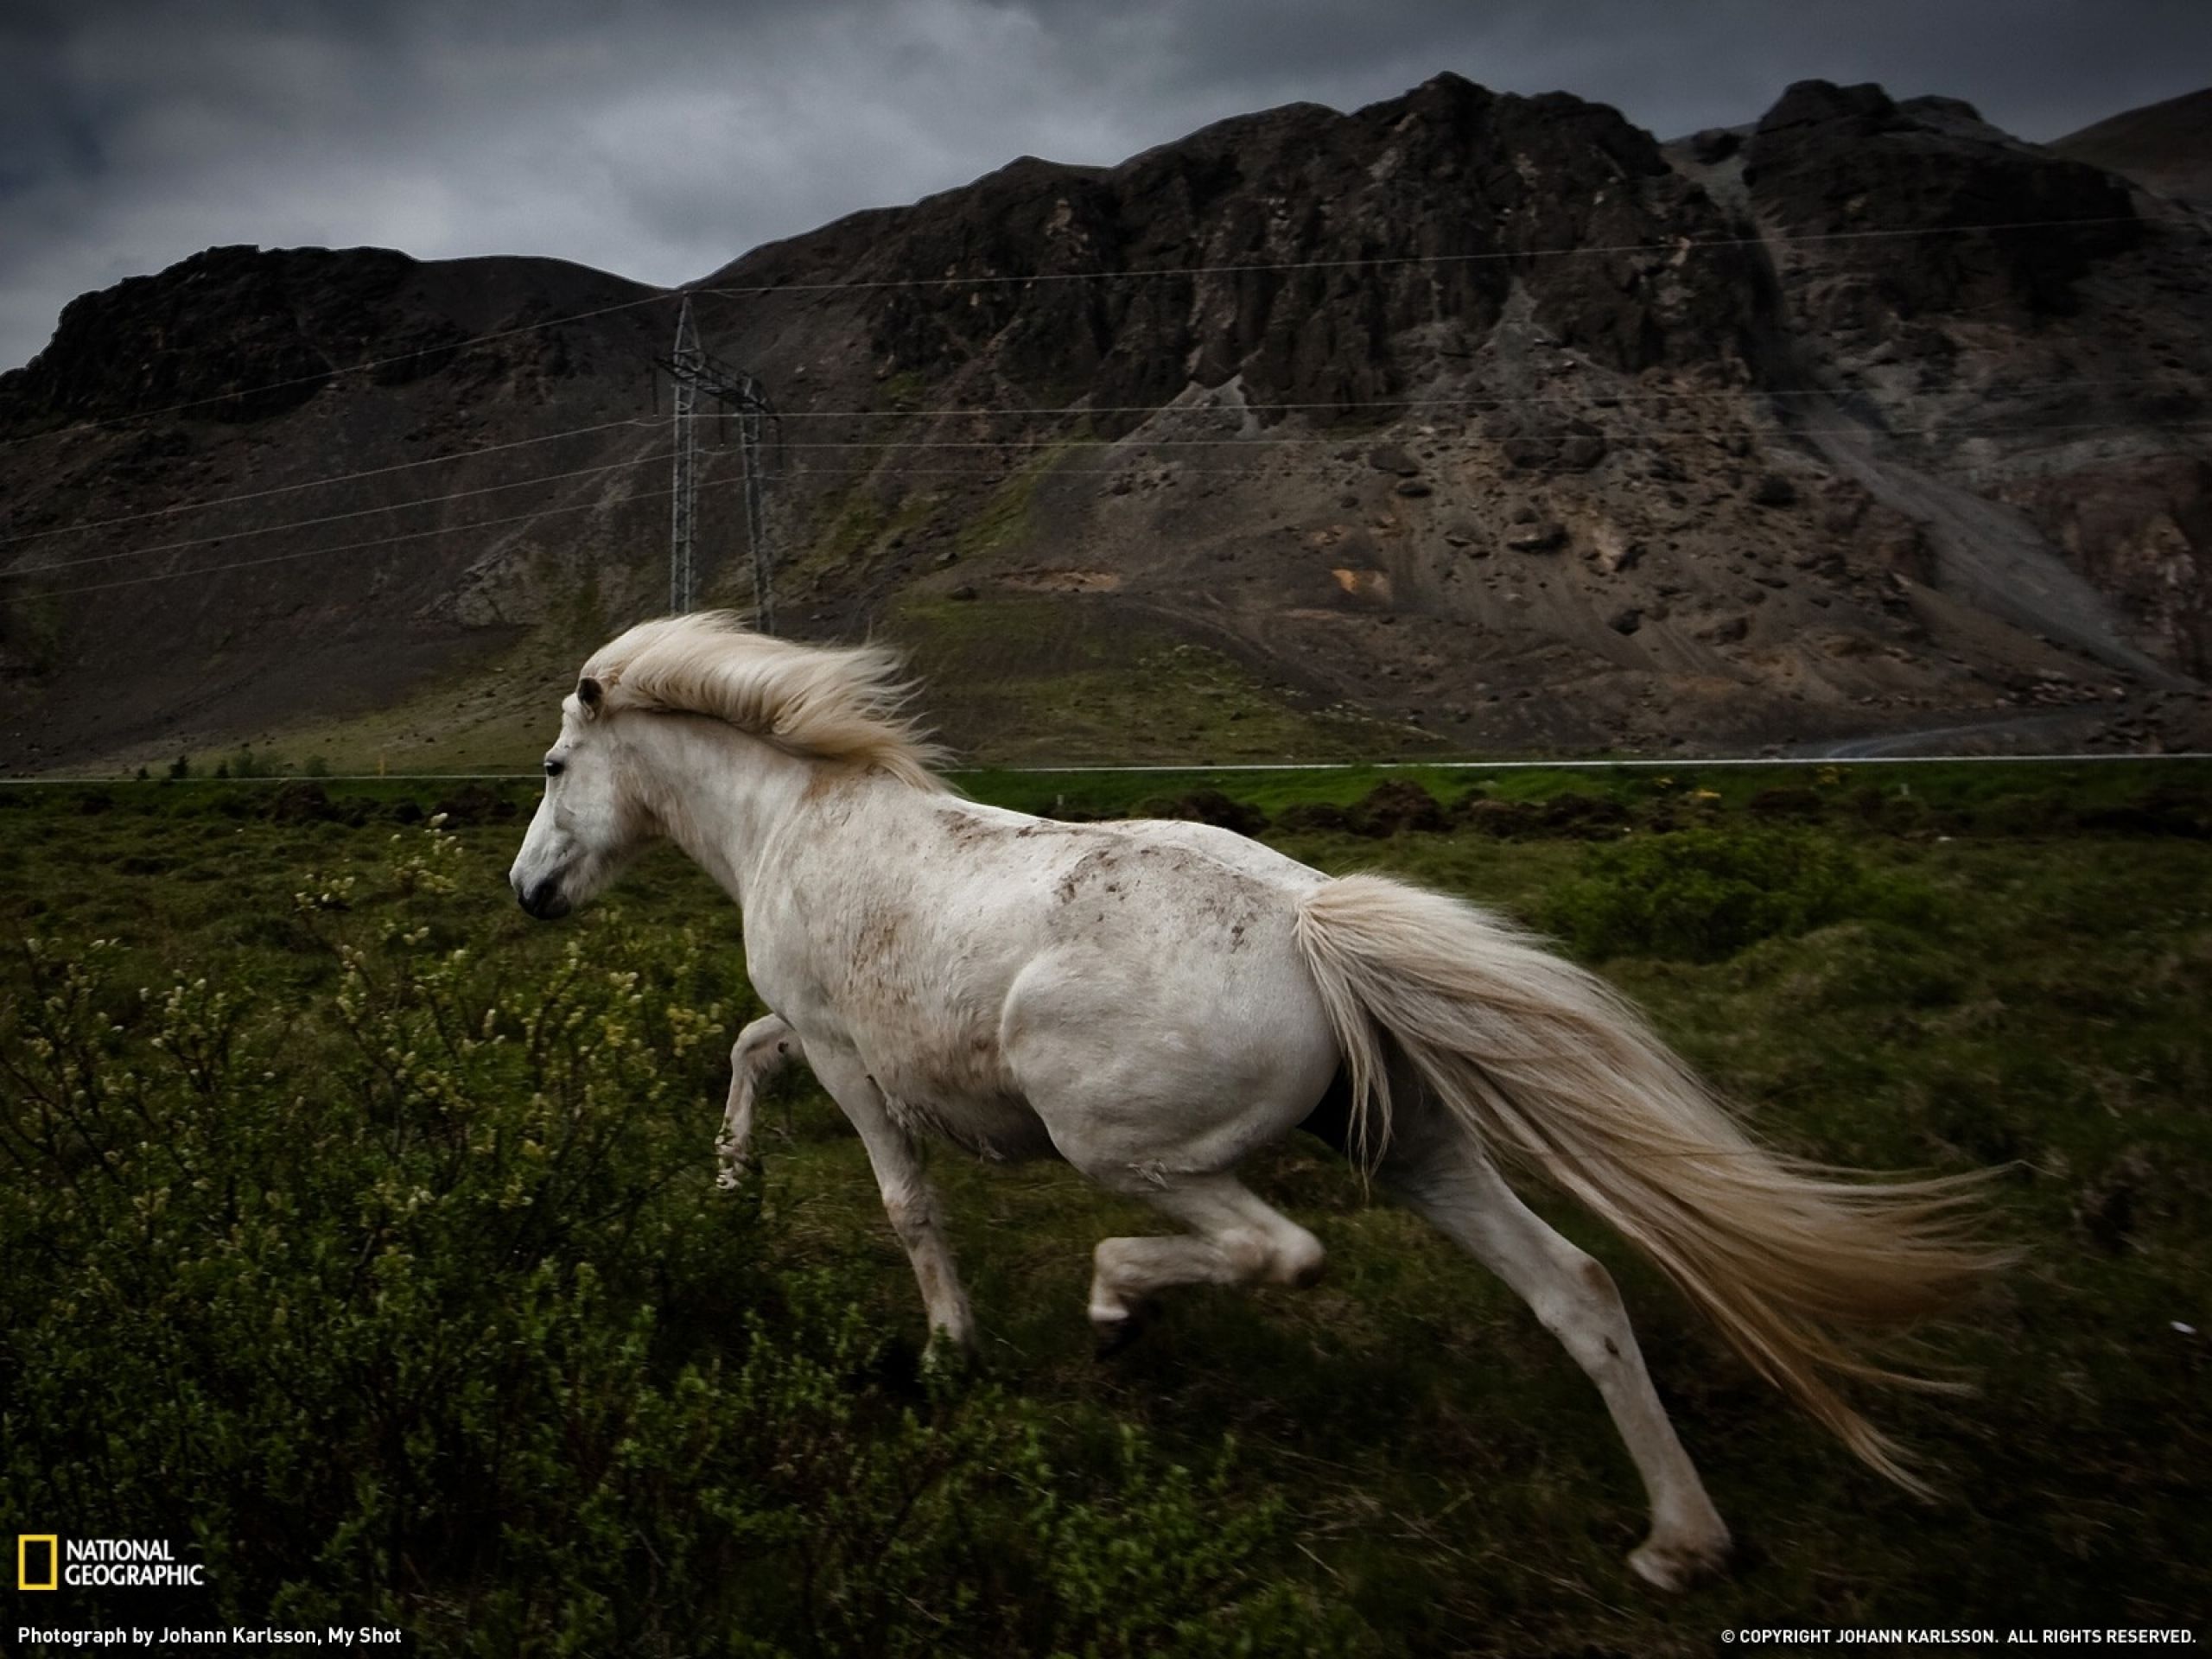 Mountains Landscape & Horse Wallpaper And